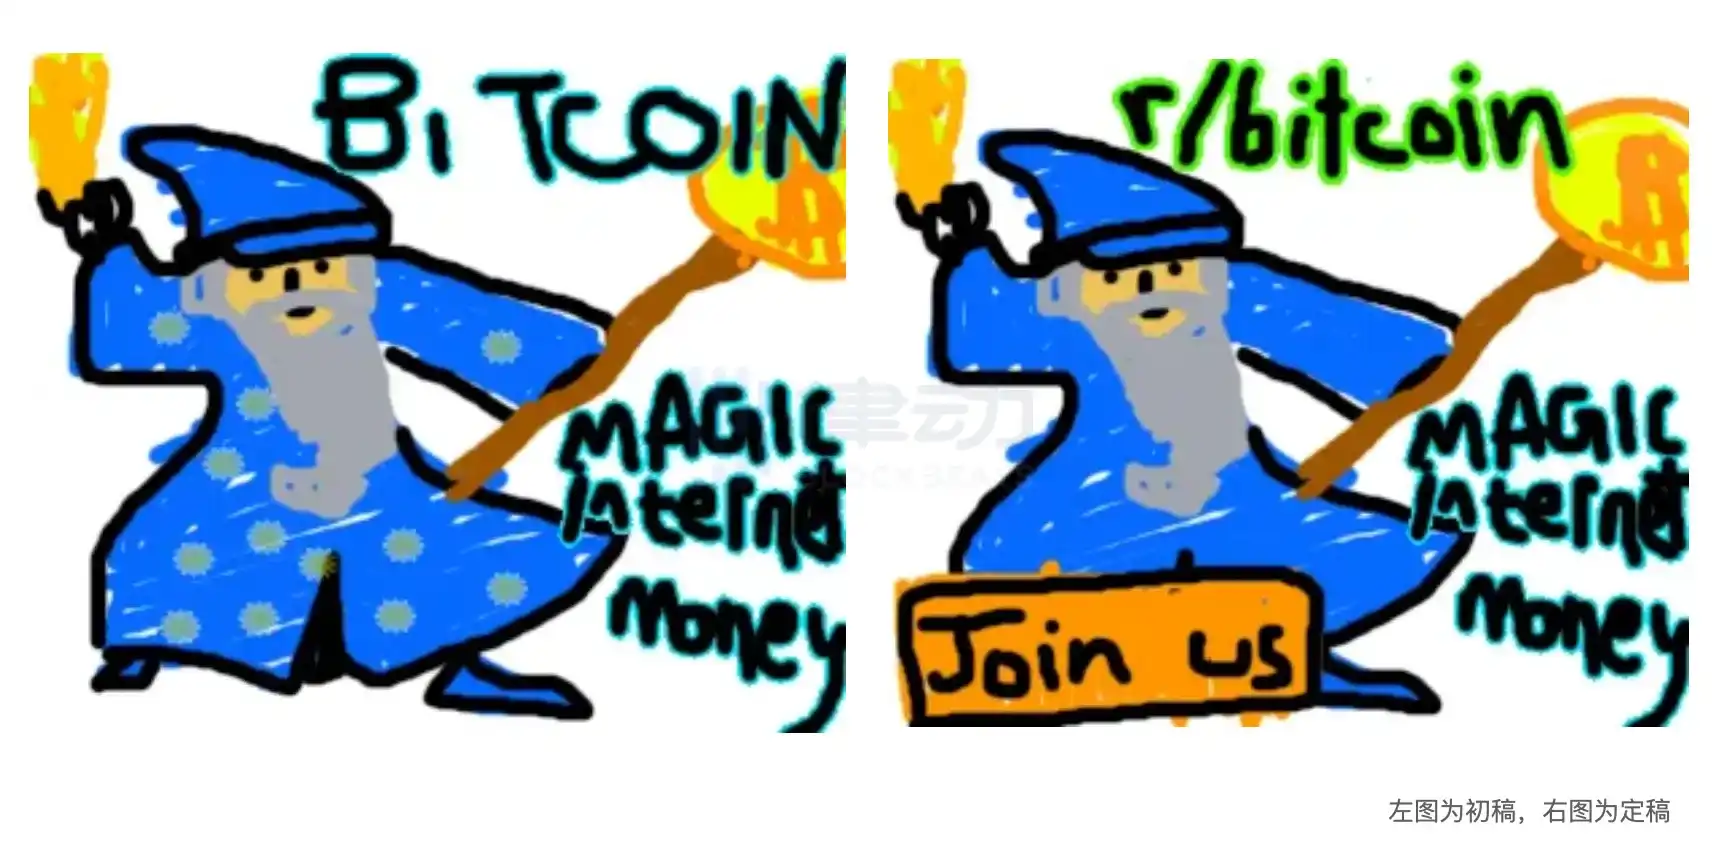 Bitcoin OG joins Taproot Wizards, why is Wizard Culture so popular?